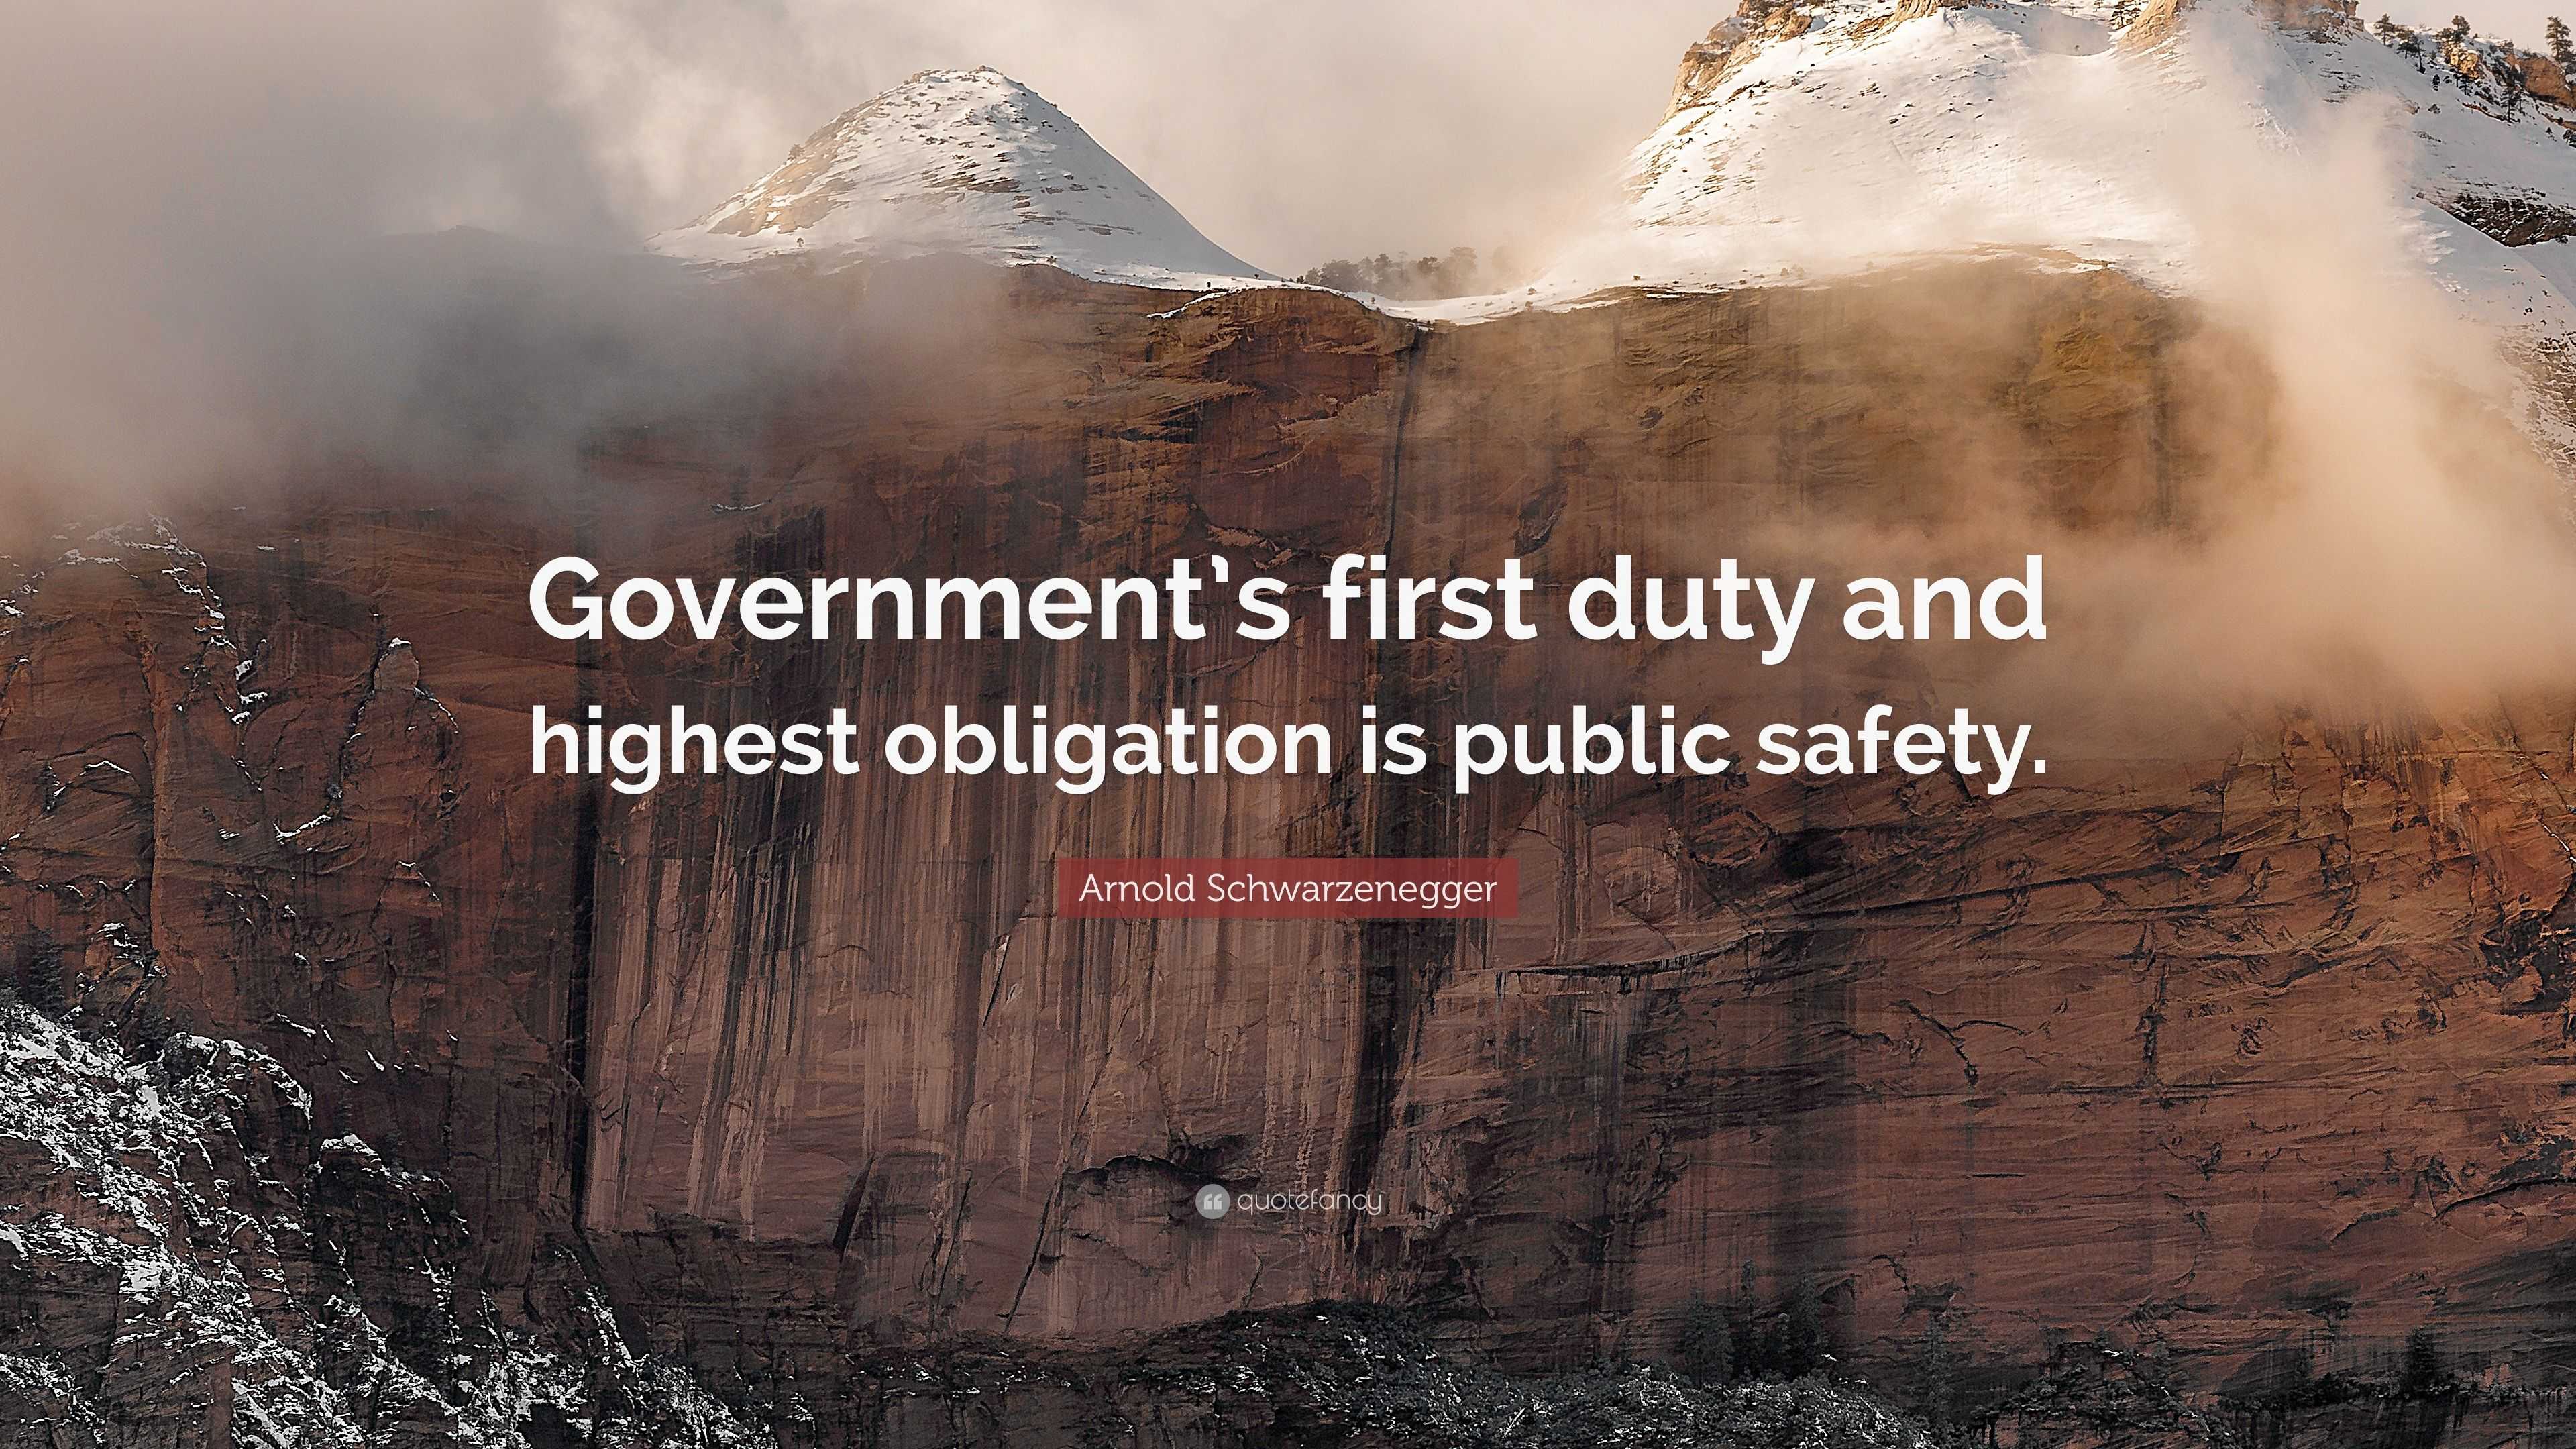 Arnold Schwarzenegger Quote “Government’s first duty and highest